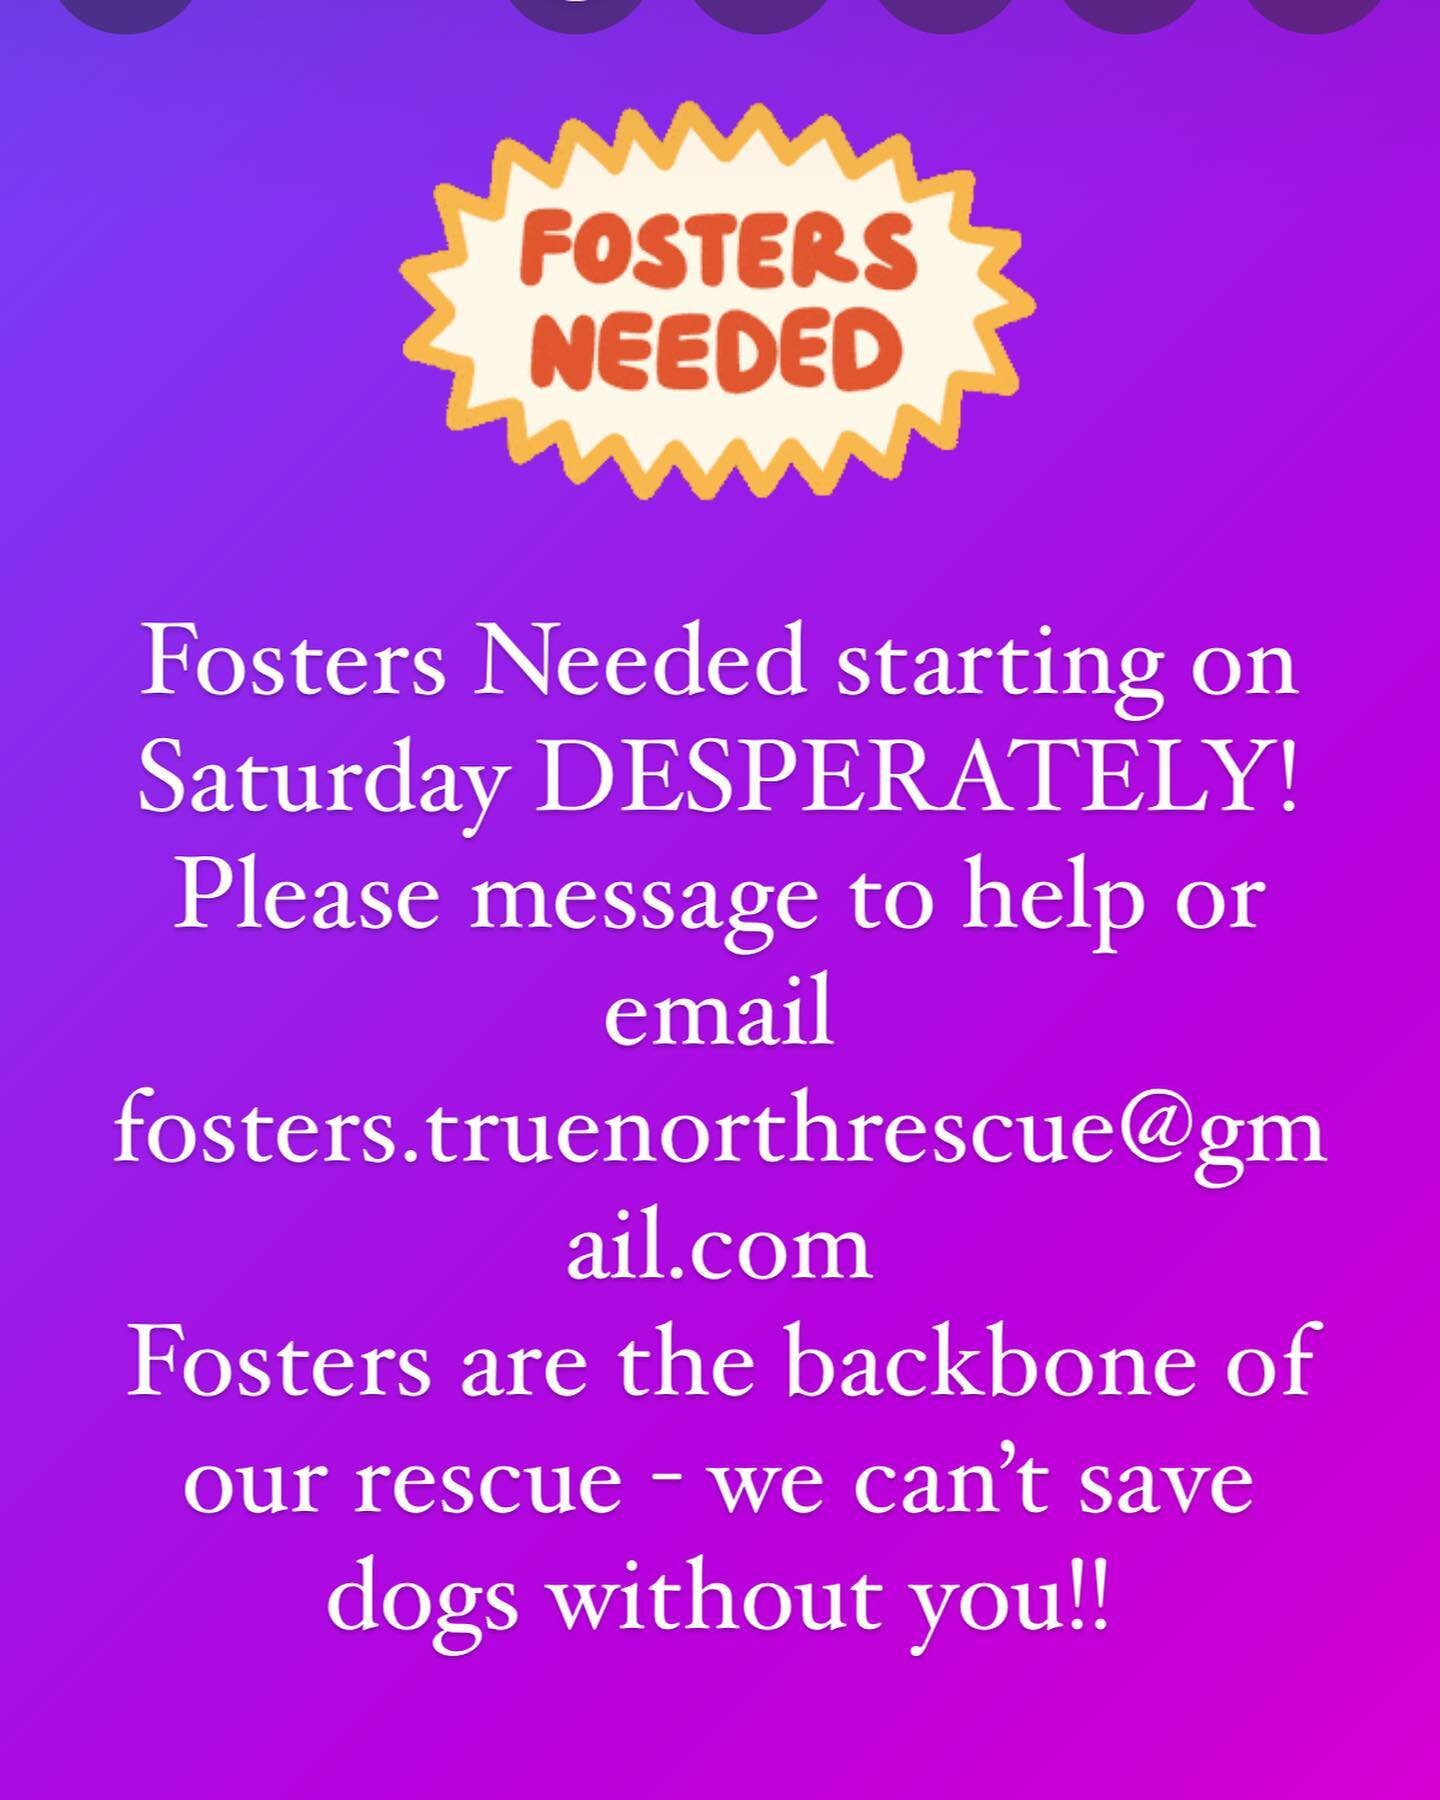 FOSTERS NEEDED ASAP

Please message us if you can help with a small or medium sized dog. 
Fostering typically lasts one to two weeks or less. Most of our dogs are adopted in 7 to 10 days. 
Once we get good photos and a biography, they go up right awa